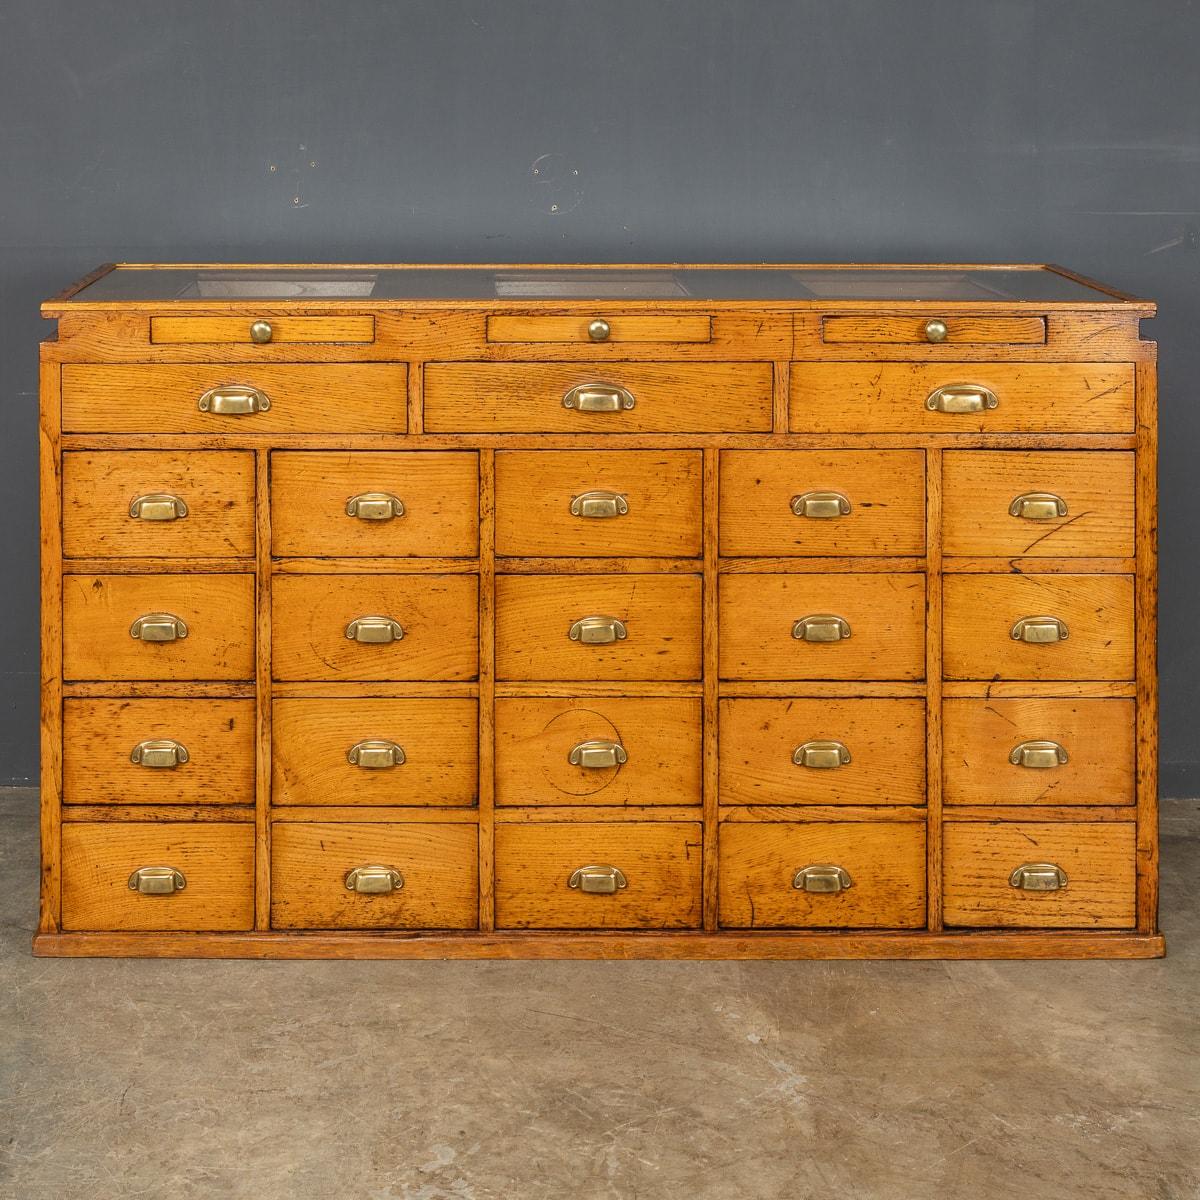 Antique 20th Century English oak haberdashery counter has a glass top showing three display drawers, under these are three wide slim drawers, beneath these are twenty drawers all have their original brass handles and knobs. In the front of the